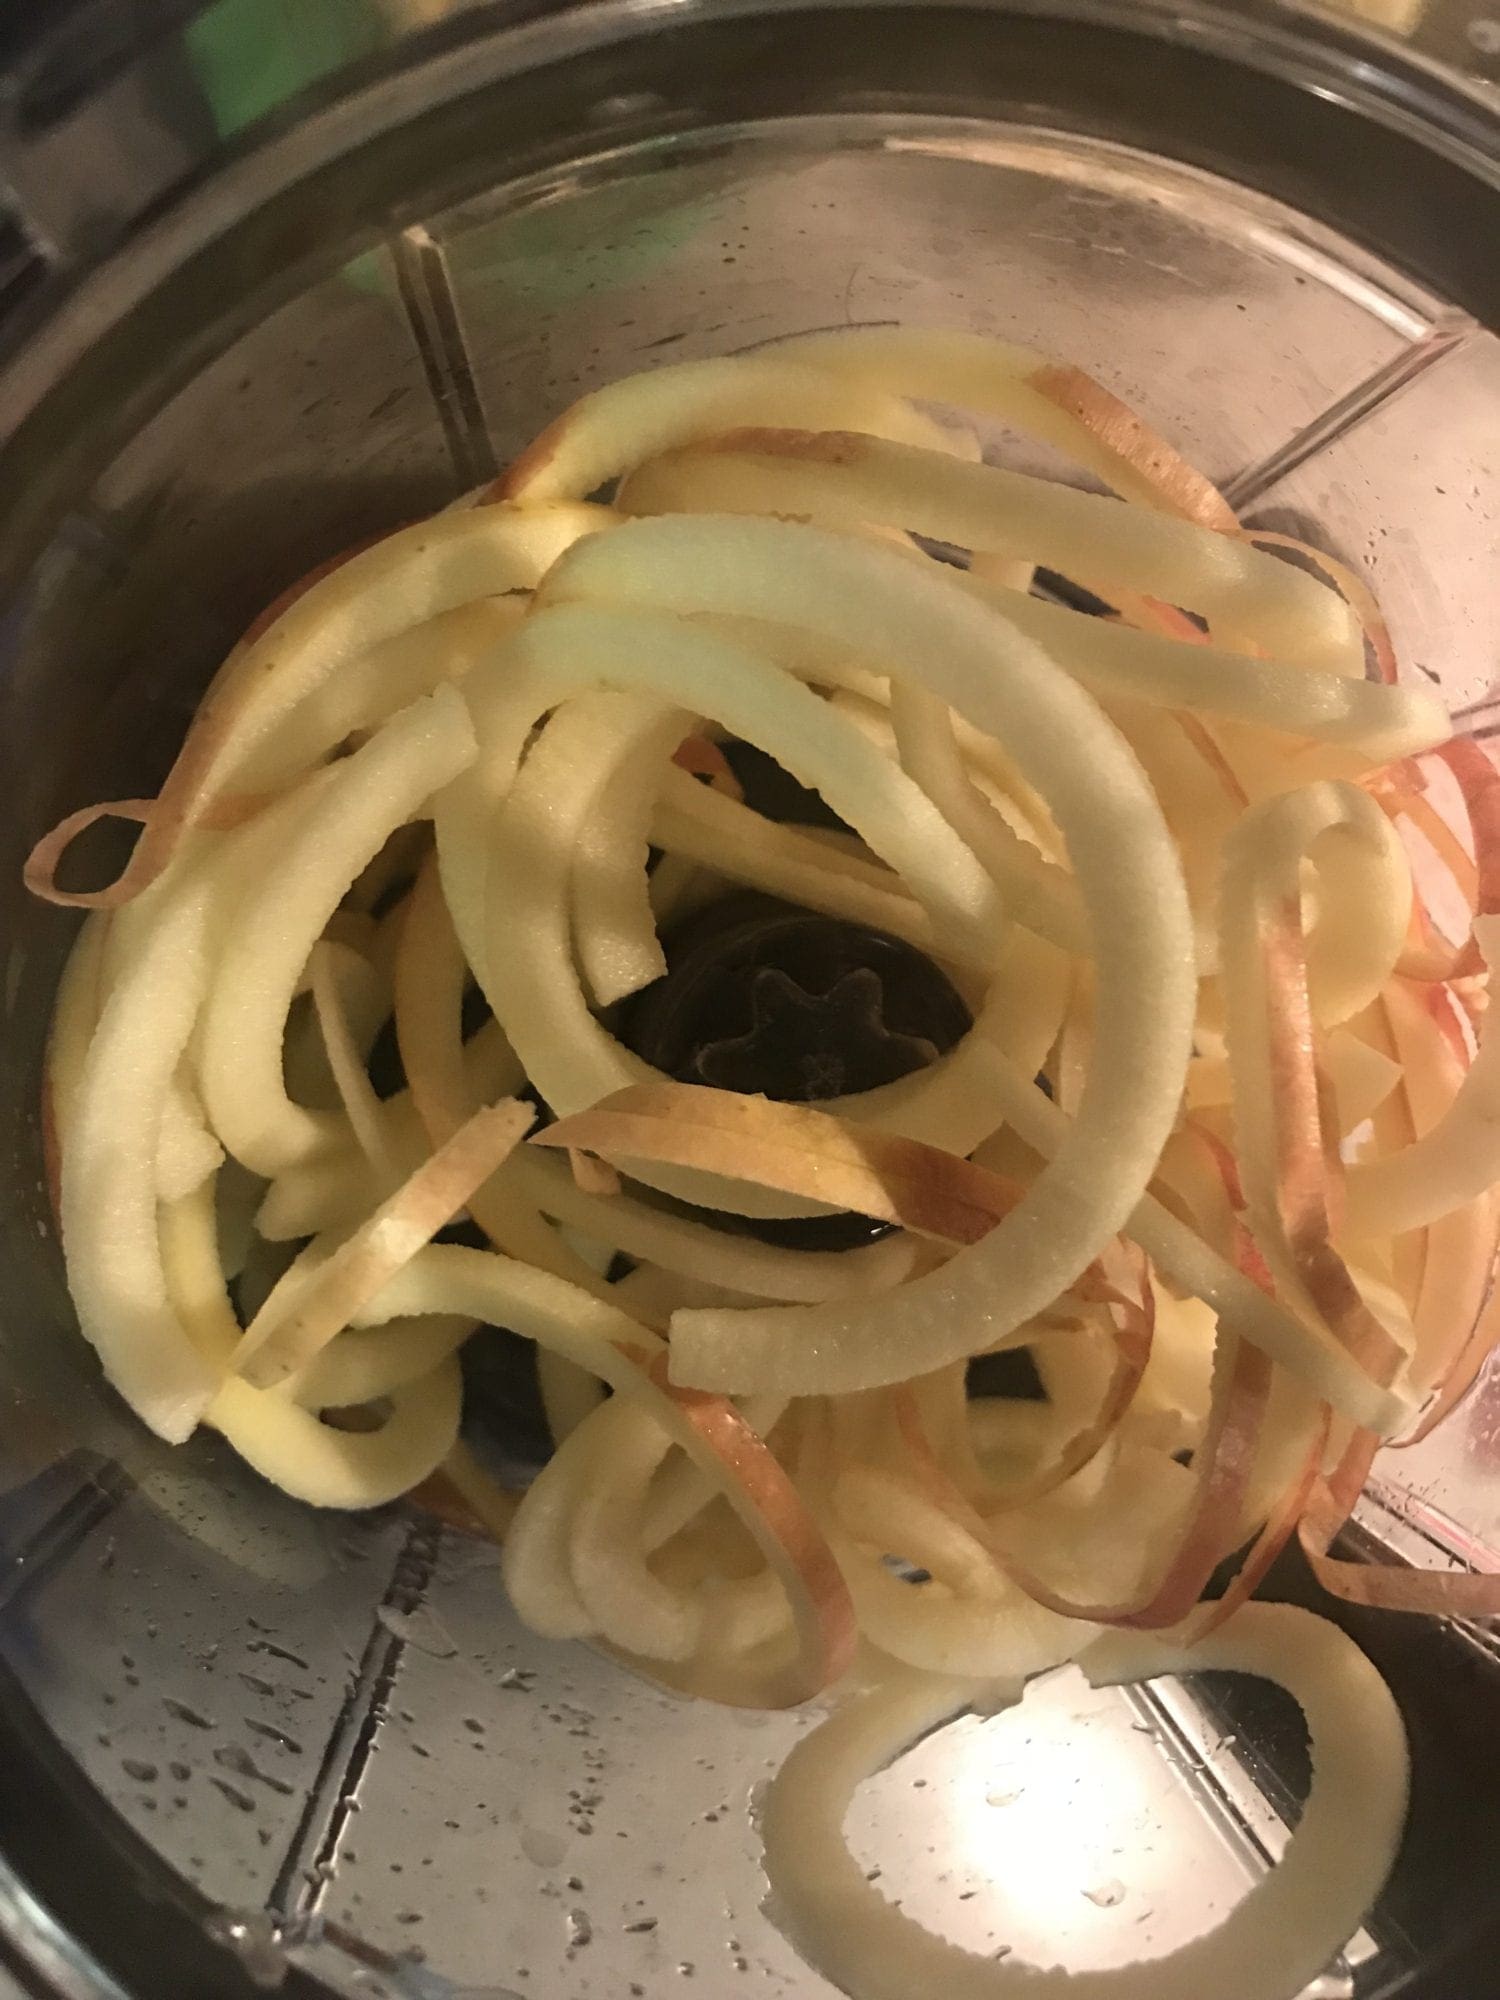 Using a spiralizer to chop apples.